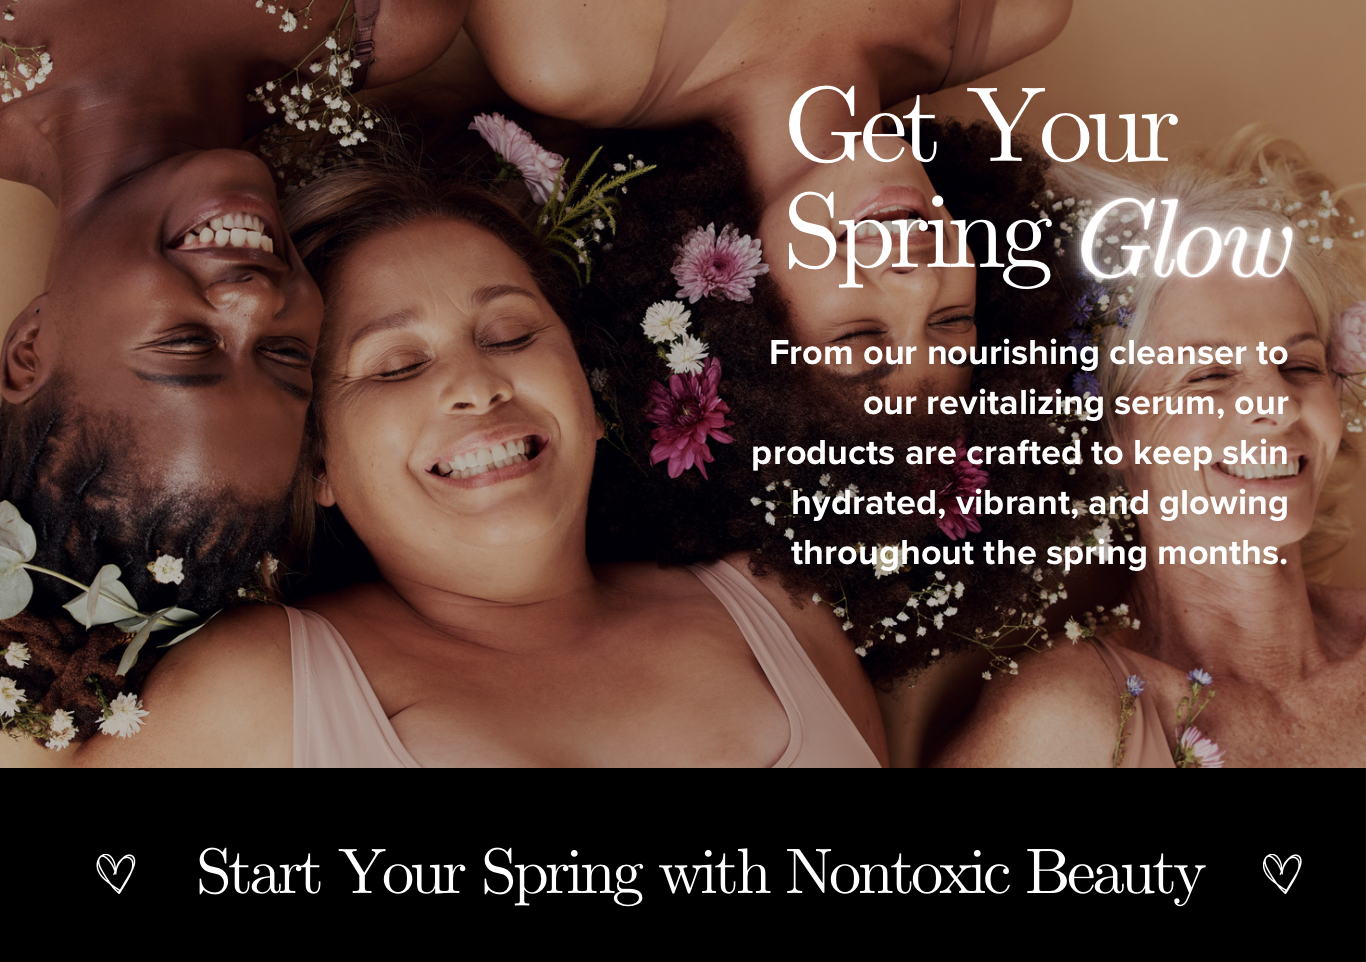 Spring into nontoxic skincare and beauty with prolyfe